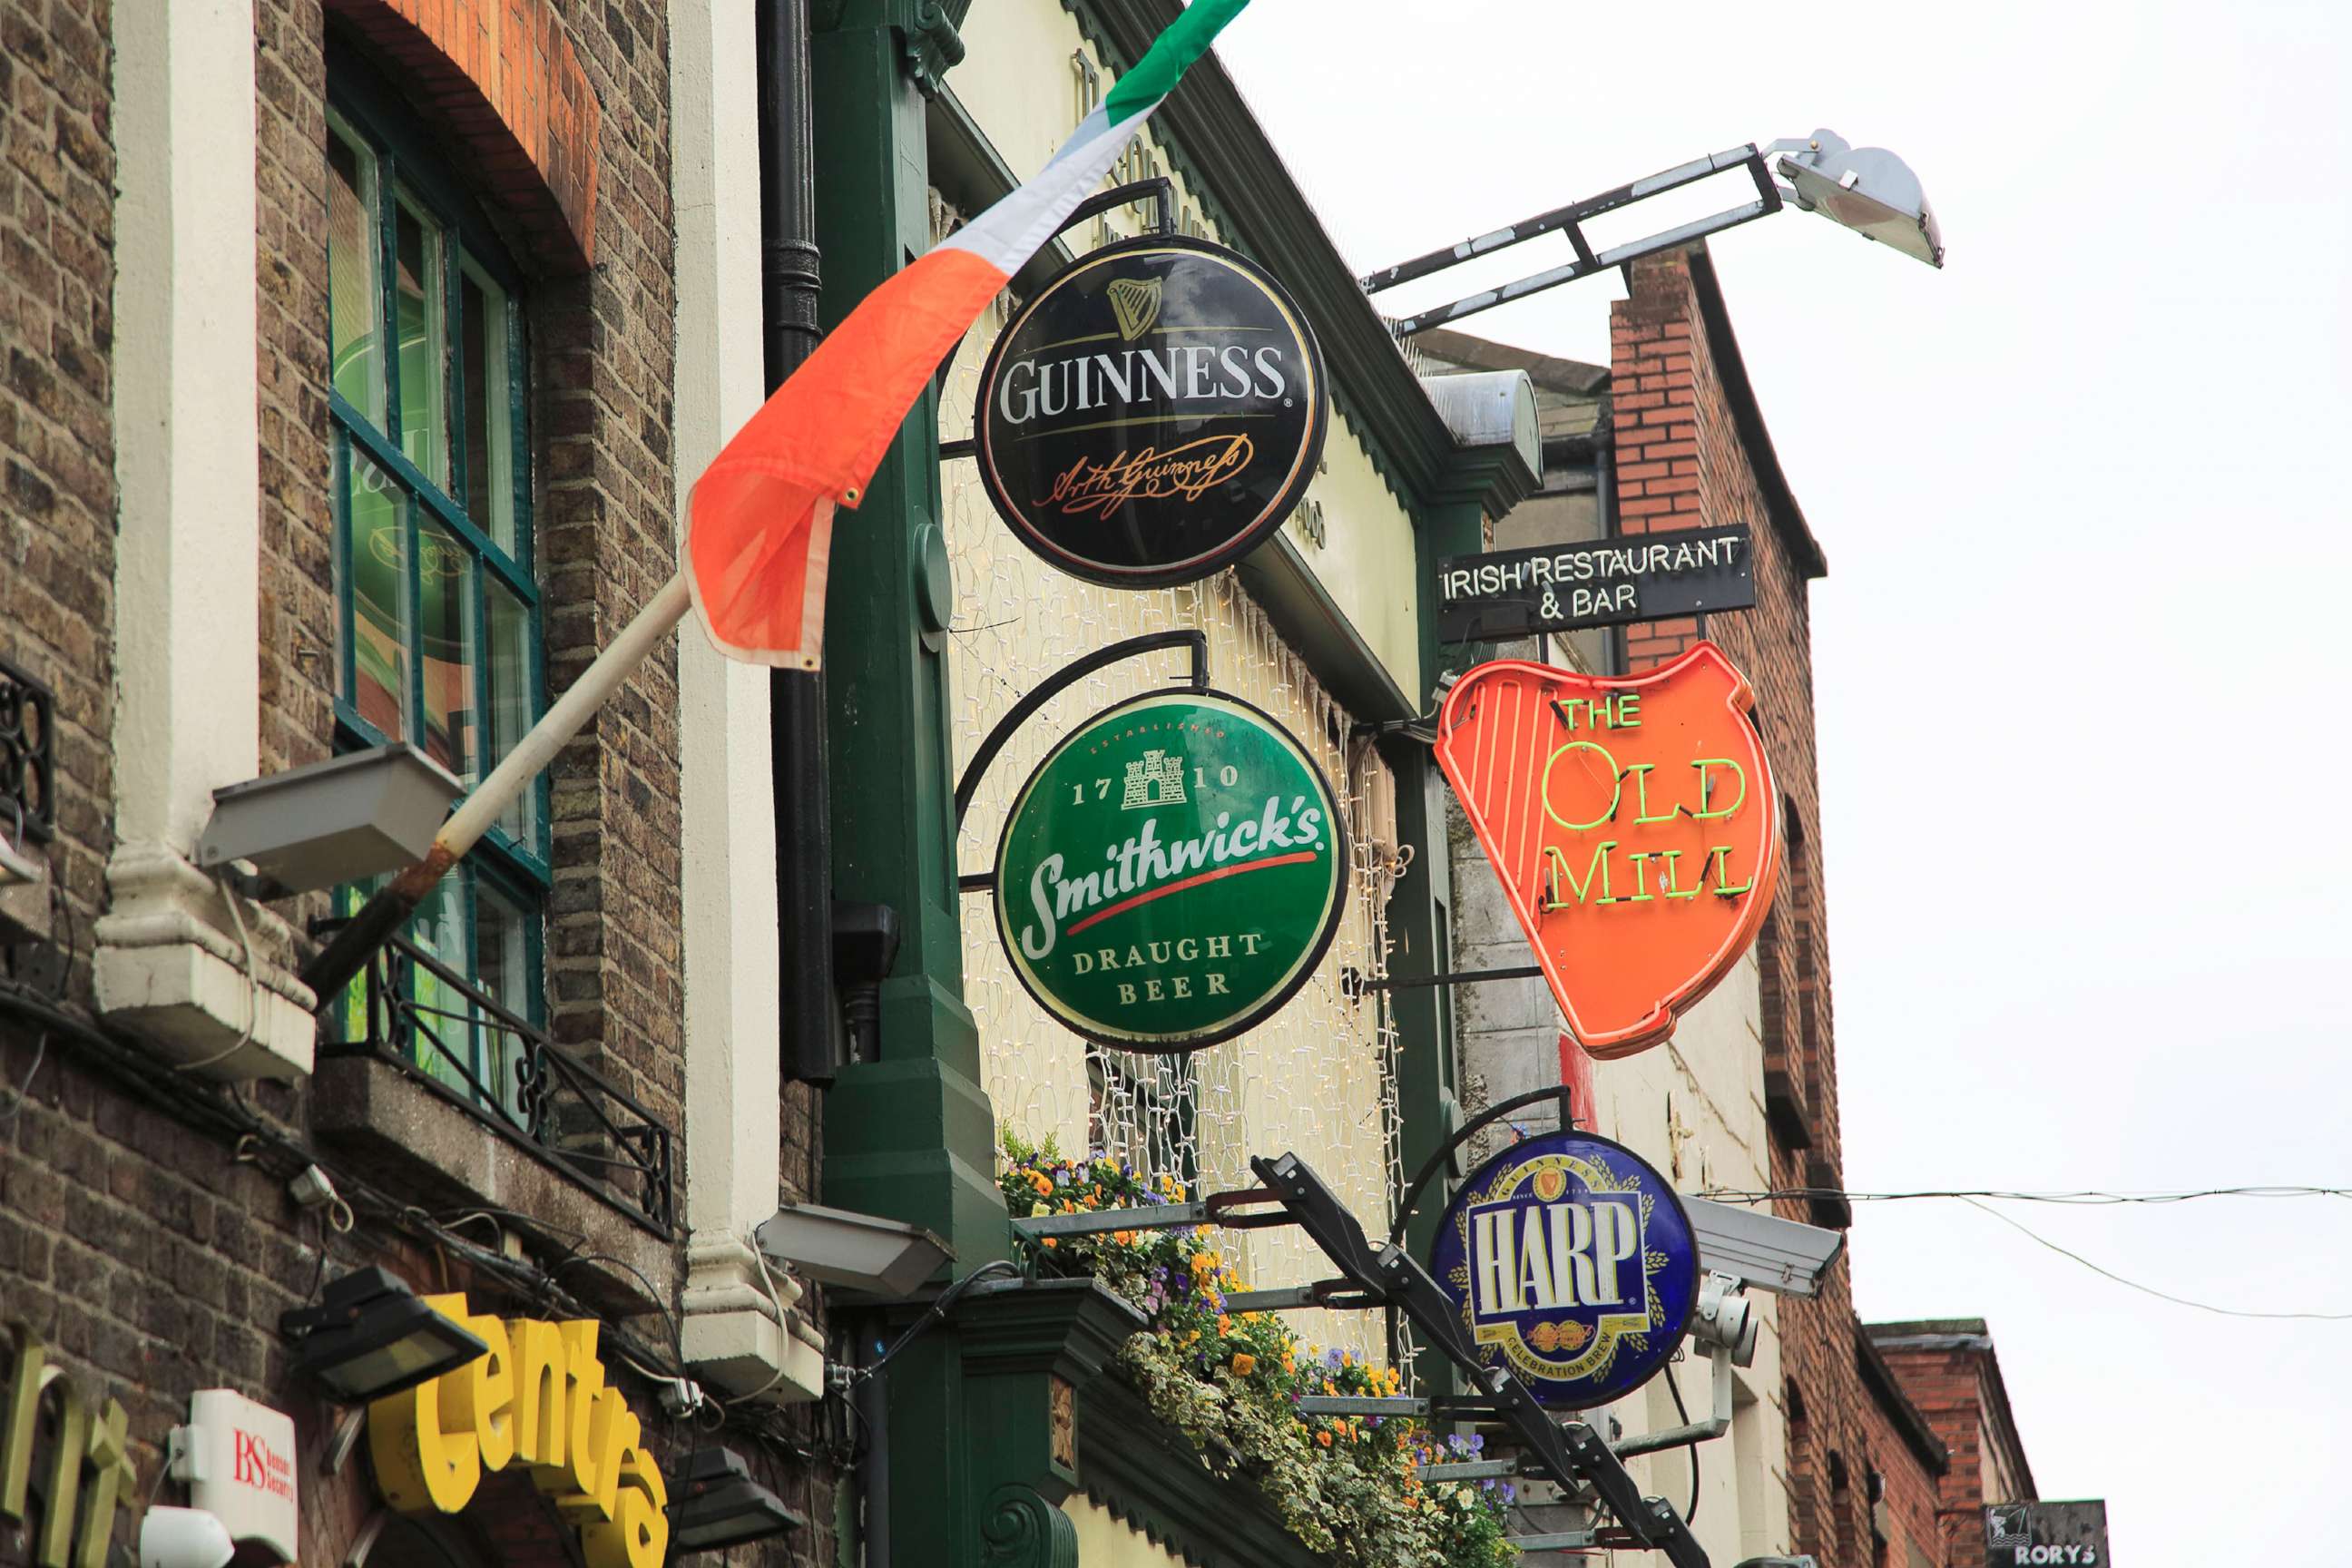 PHOTO: Beer signs are seen outside The Old Mill pub in Dublin, Ireland in this undated stock photo.